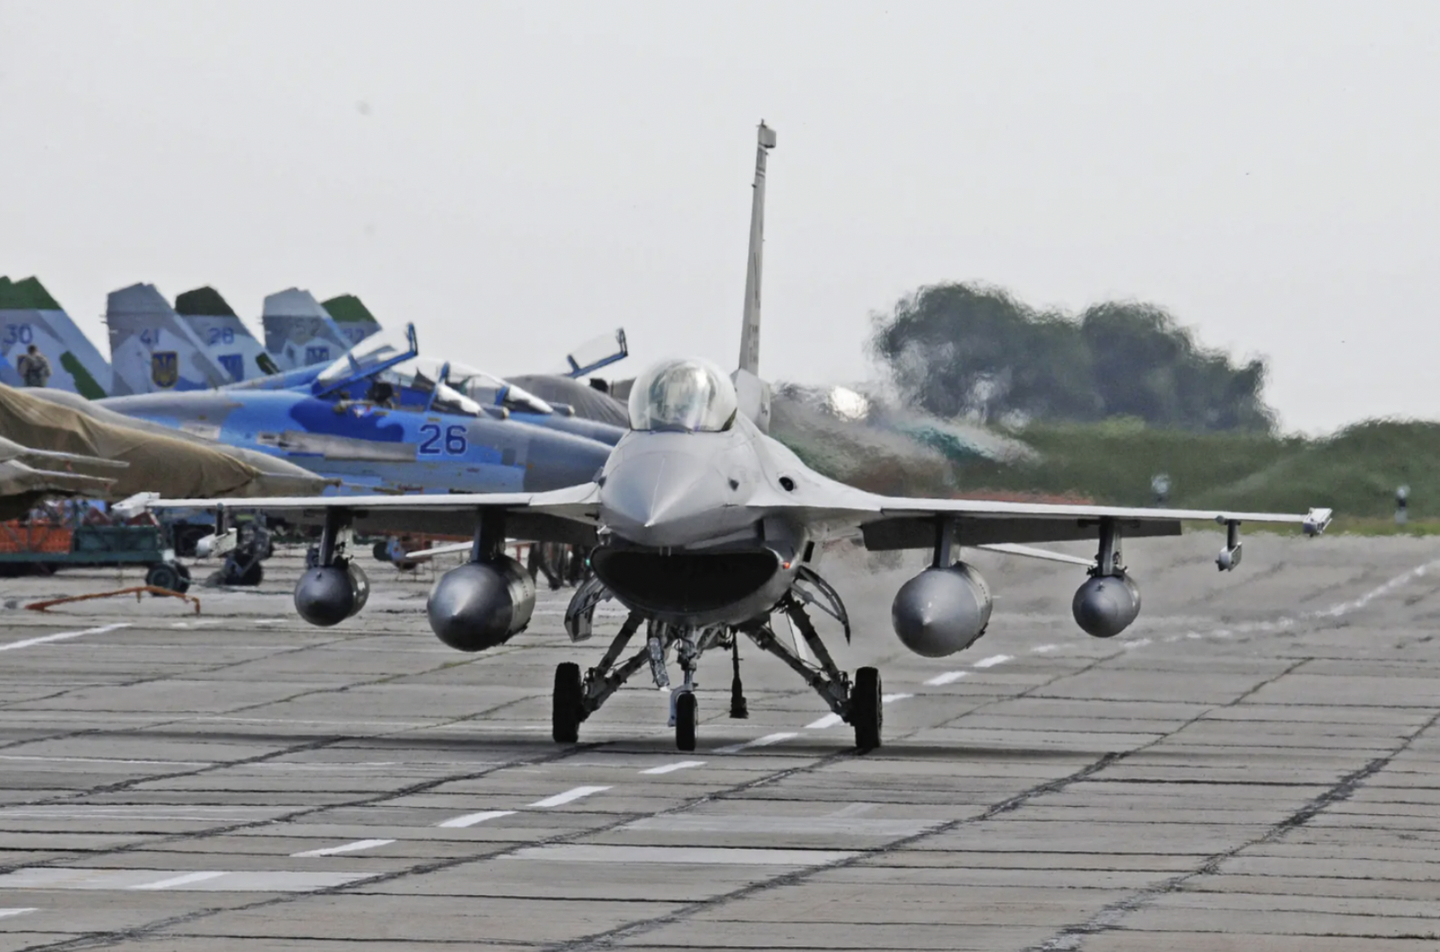 An Alabama Air National Guard F-16C taxies past Ukrainian Su-27 and MiG-29 fighter jets, on the ramp at Mirgorod Air Base, Ukraine, during an exercise in 2011.&nbsp;<em>U.S. Air Force</em>